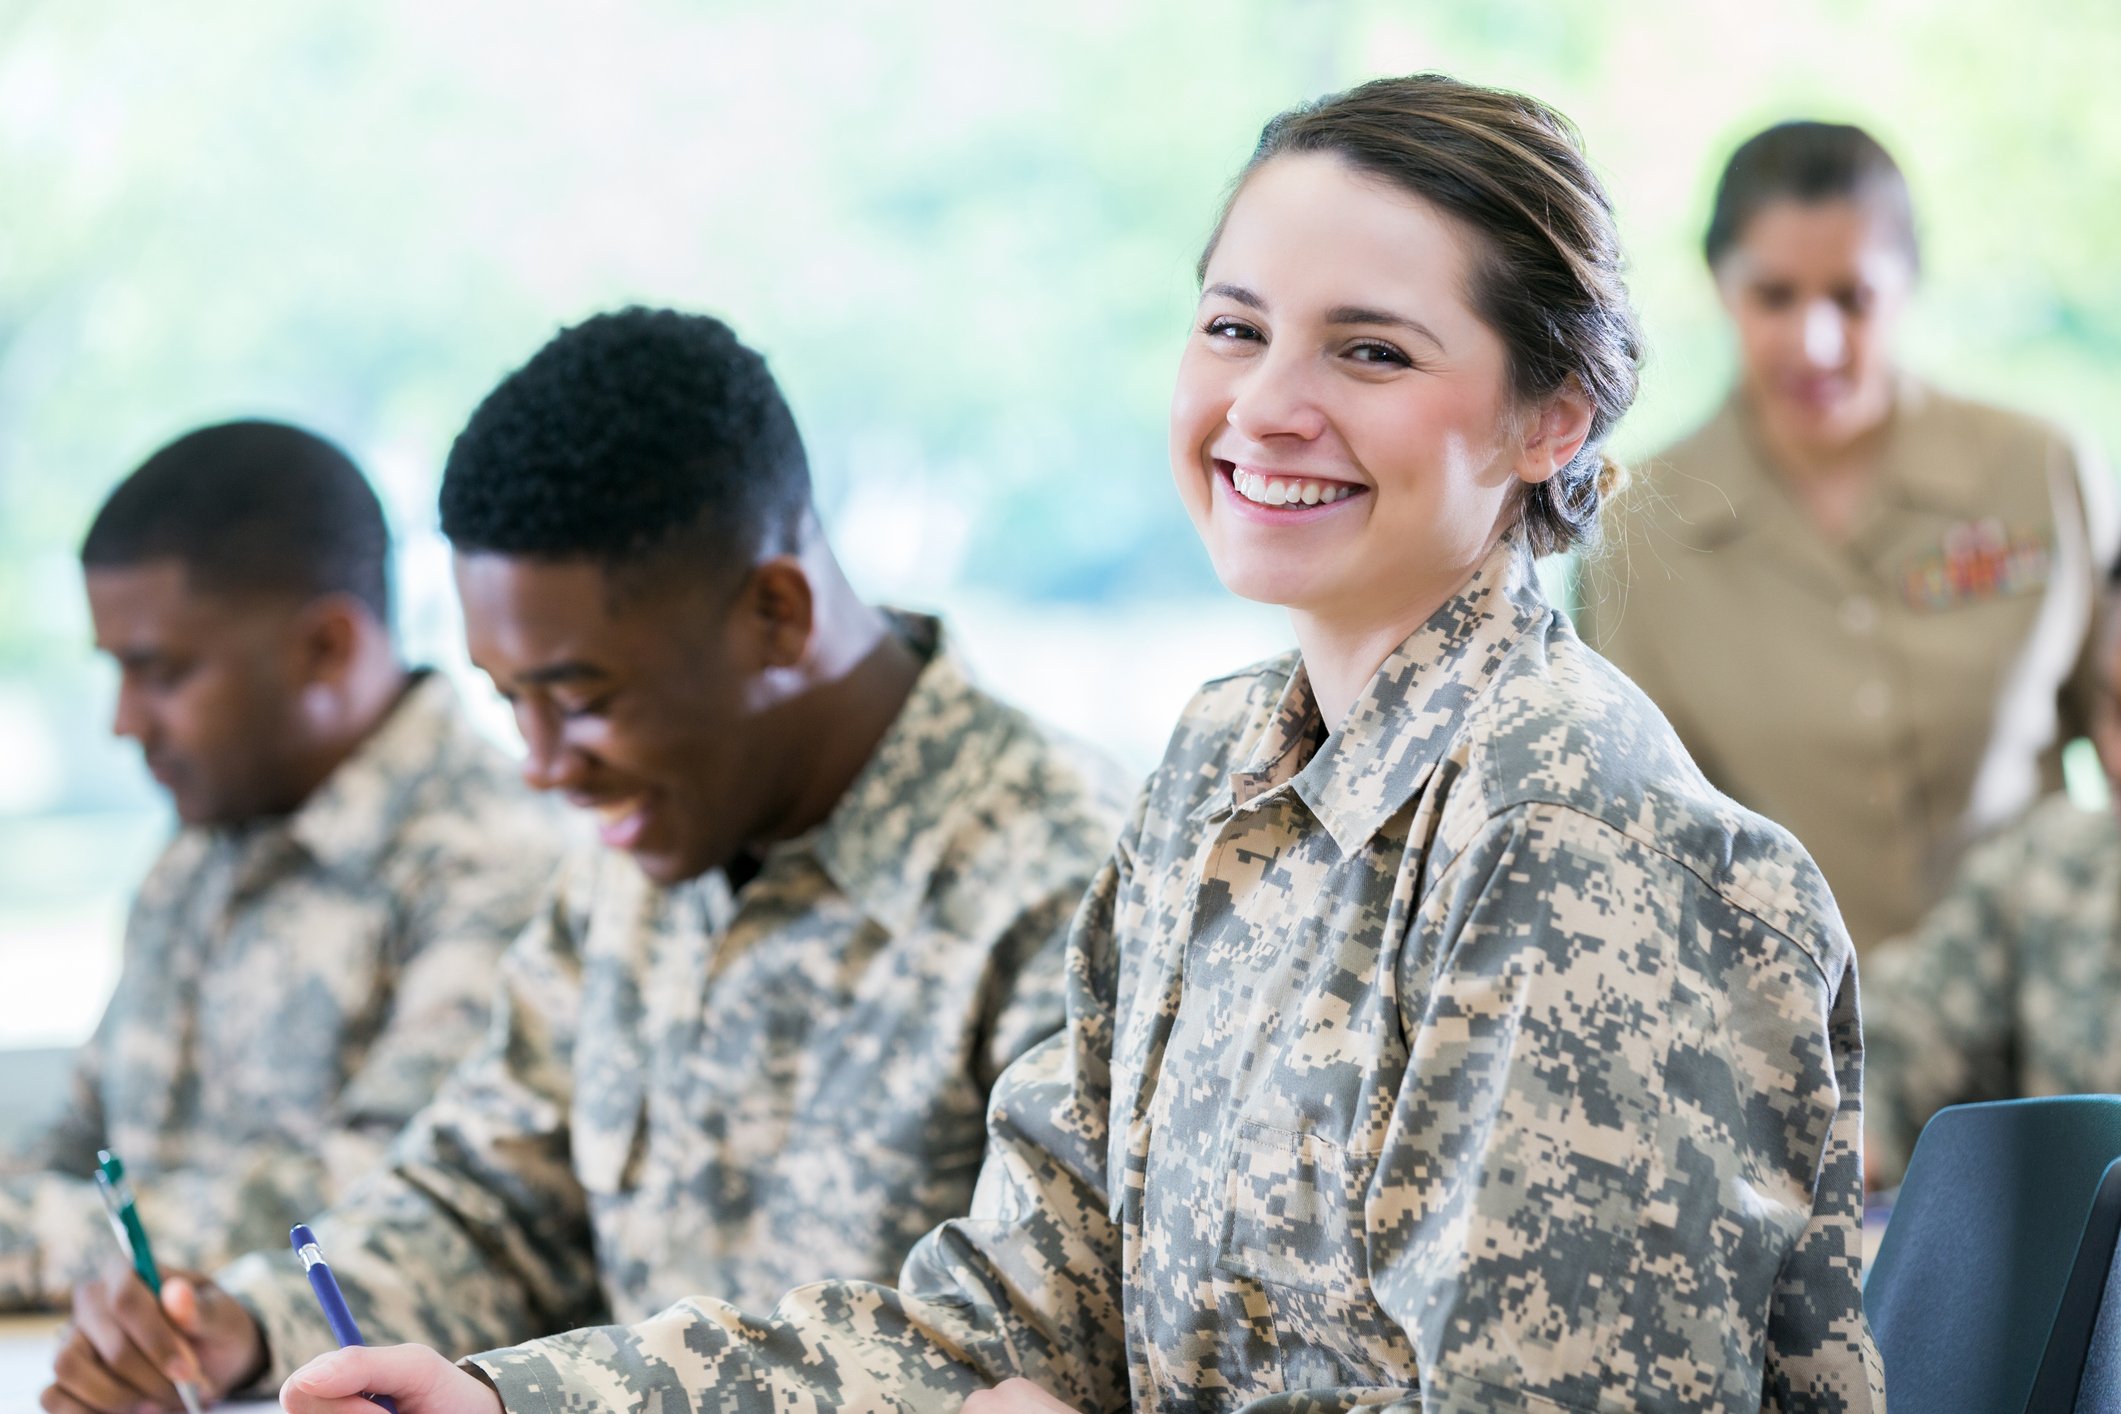 Smiling female cadet attends class at a military academy. She is looking at the camera.